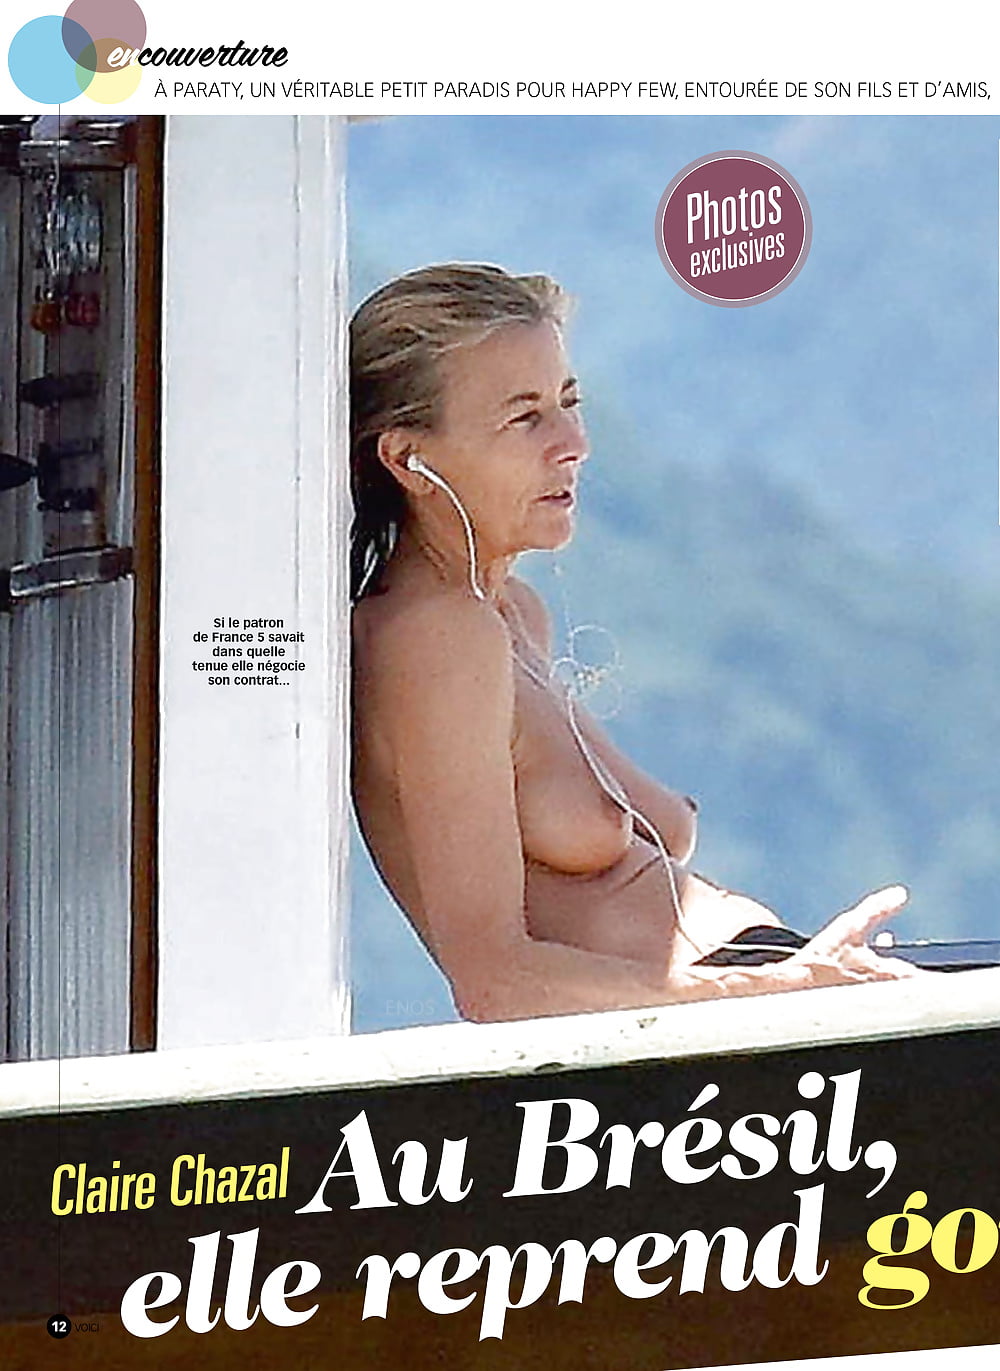 Claire chazal topless